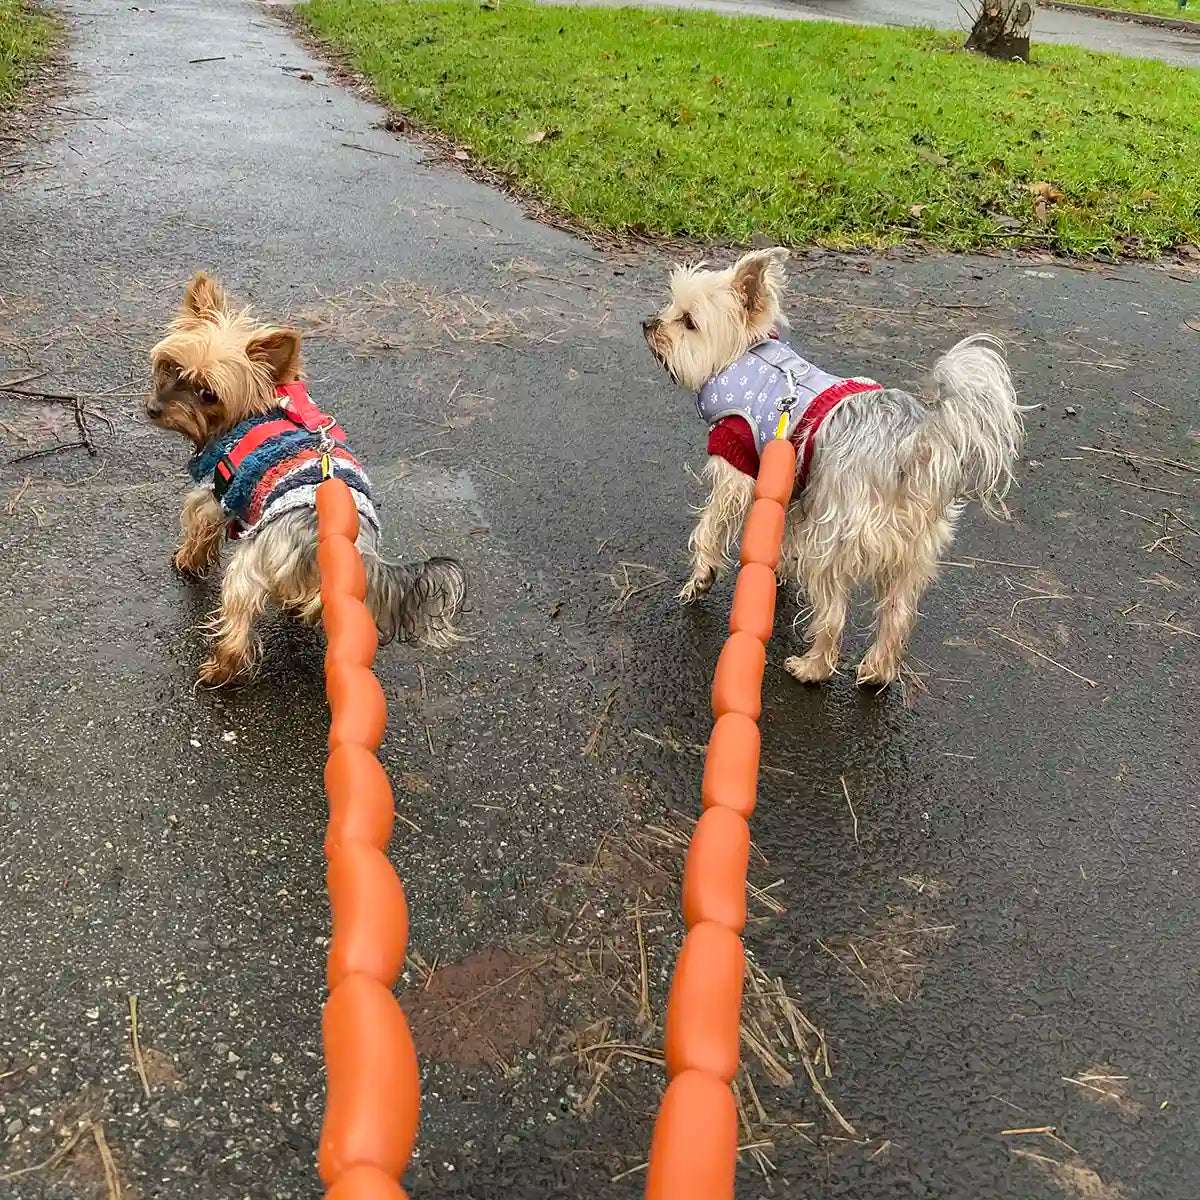 Small dogs like these Yorkshire Terrier looks fashionable in our 4Doggo hotdog sausage leads